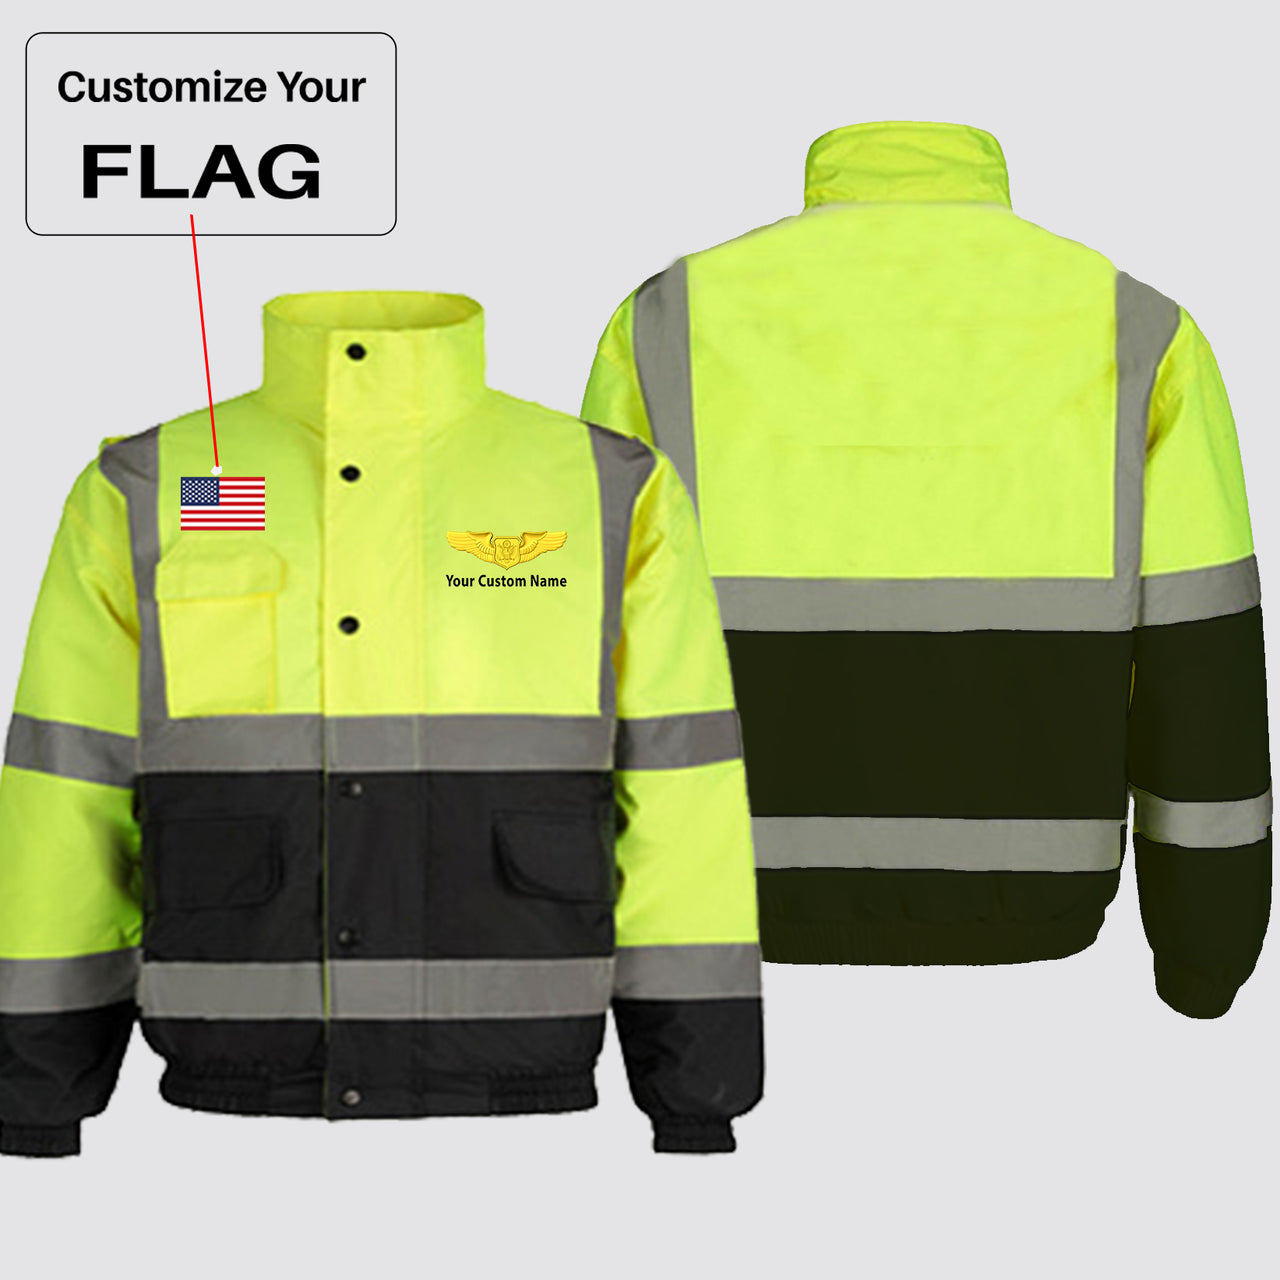 Custom Flag & Name with (Special US Air Force) Designed Reflective Winter Jackets